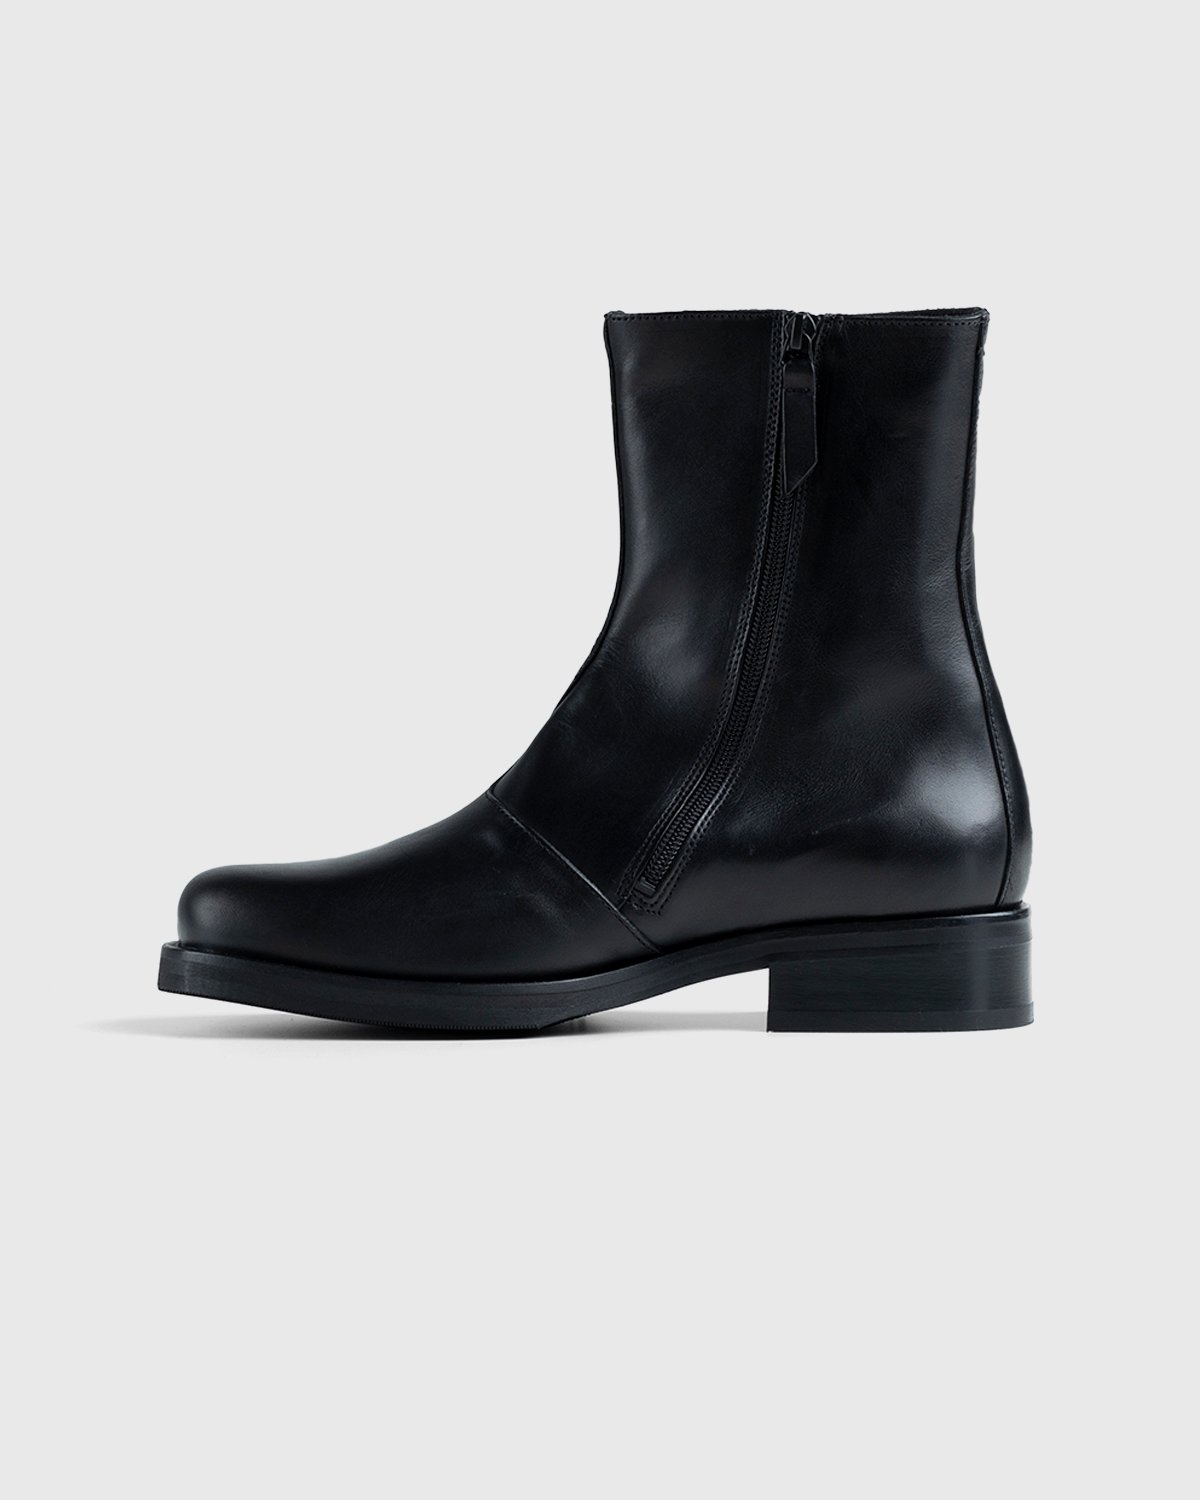 Our Legacy – Camion Boot Black - Zip-up & Buckled Boots - Black - Image 7